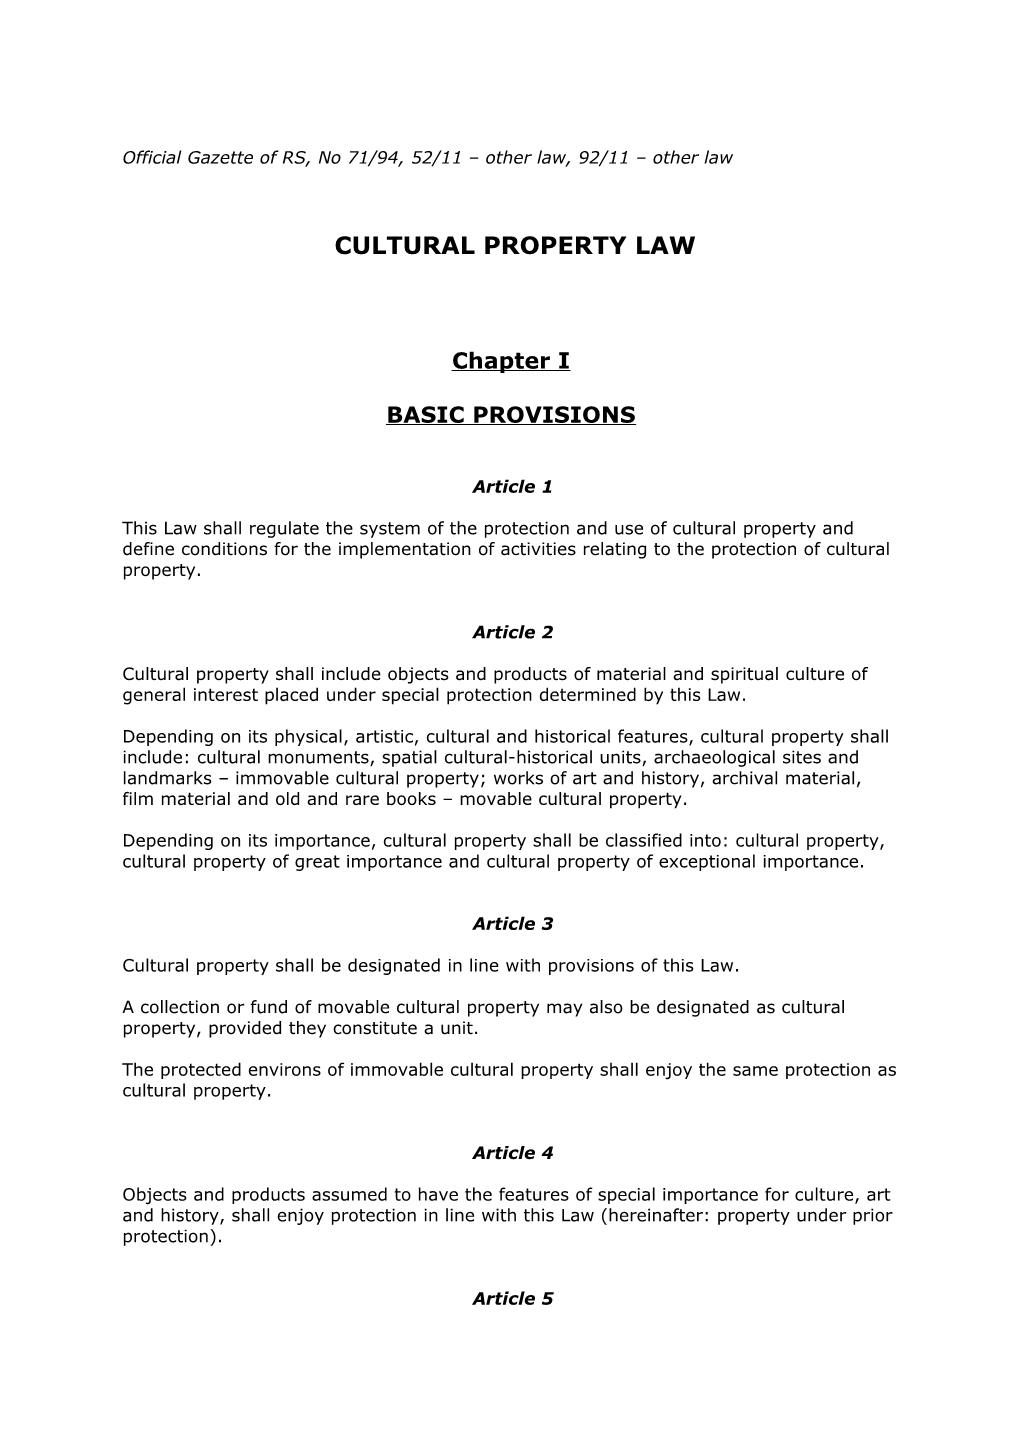 Official Gazette of RS, No 71/94, 52/11 Other Law, 92/11 Other Law